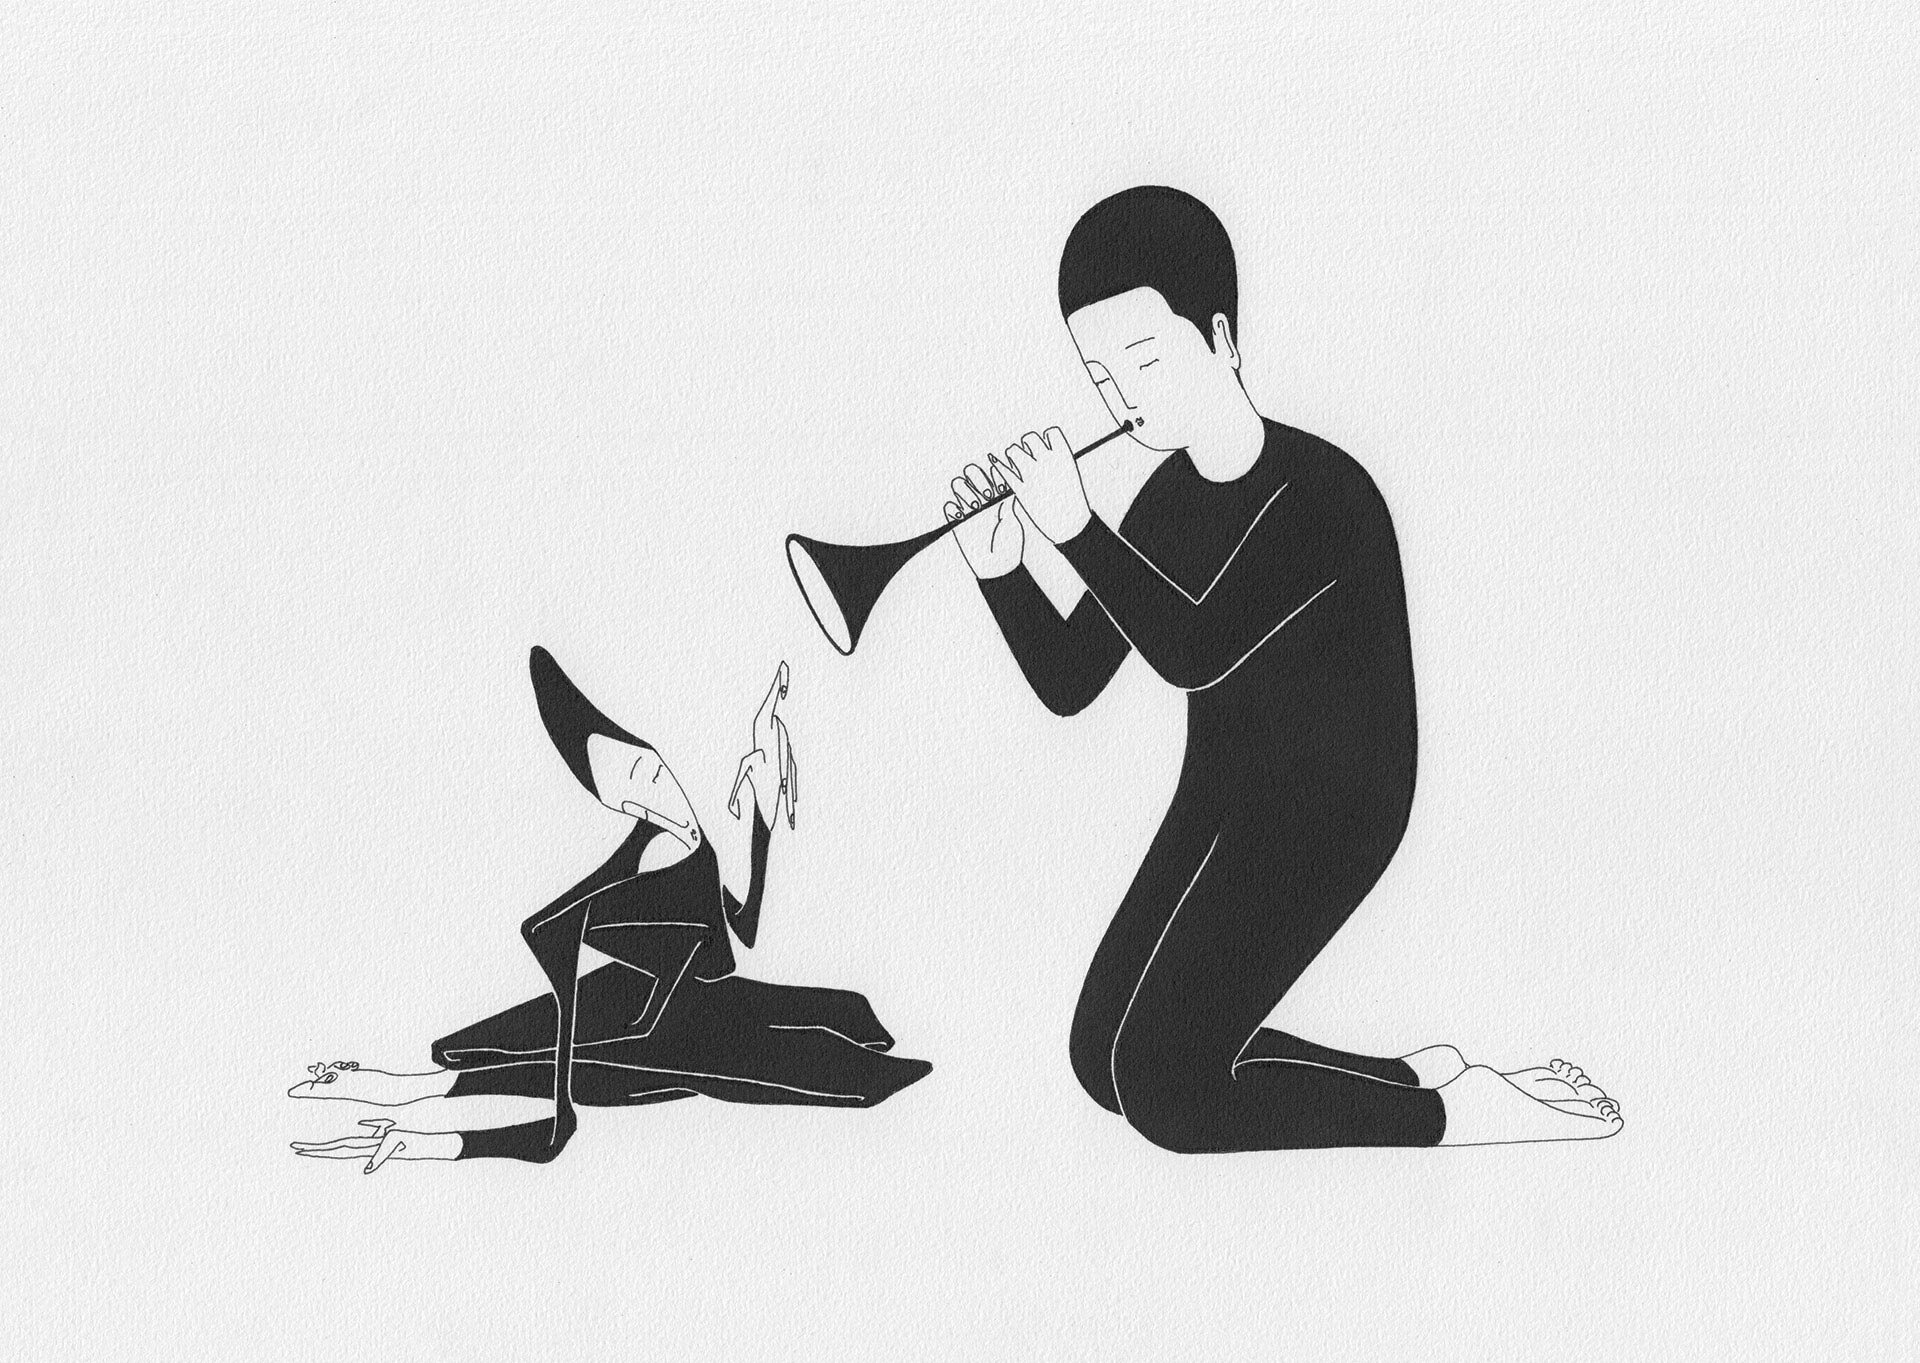 Commissioned Work - Kitsuné Musique / Play List #2 Illustrated by Moonassi / 2018